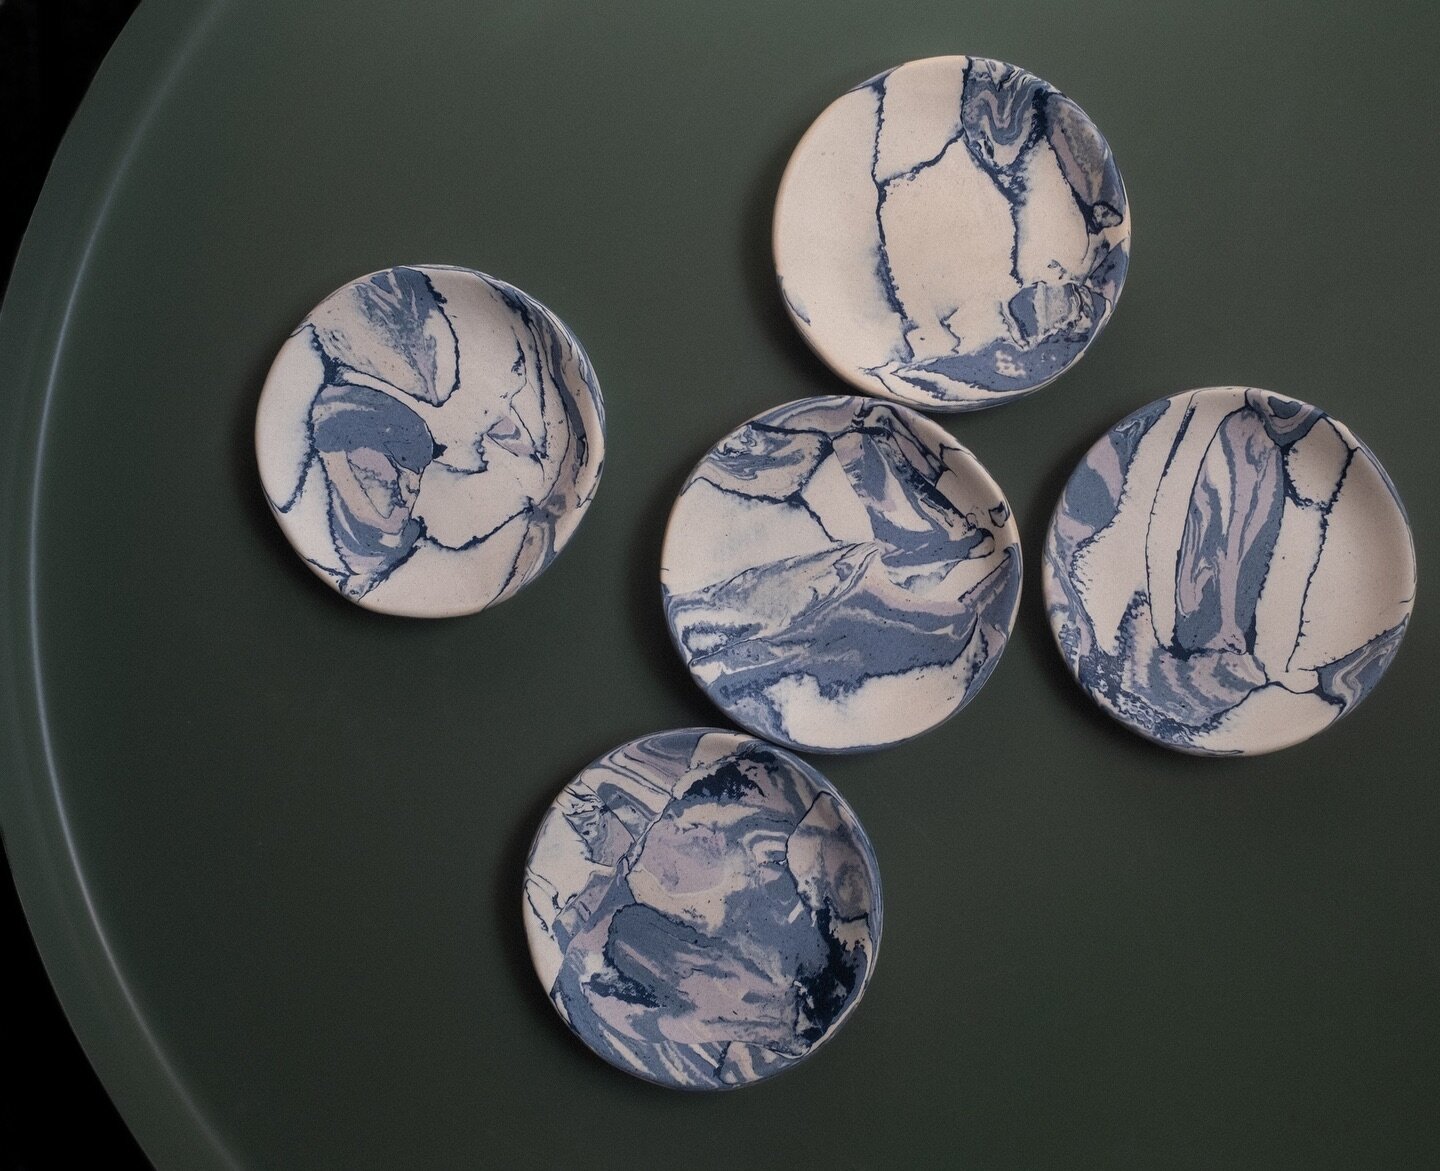 each one of these porcelain ring dishes is one of a kind, made using a technique called nerikomi at @clayspace_bk 
.
#ceramics #interiordesign #homedecor #oneofakind #ooak #nerikomi